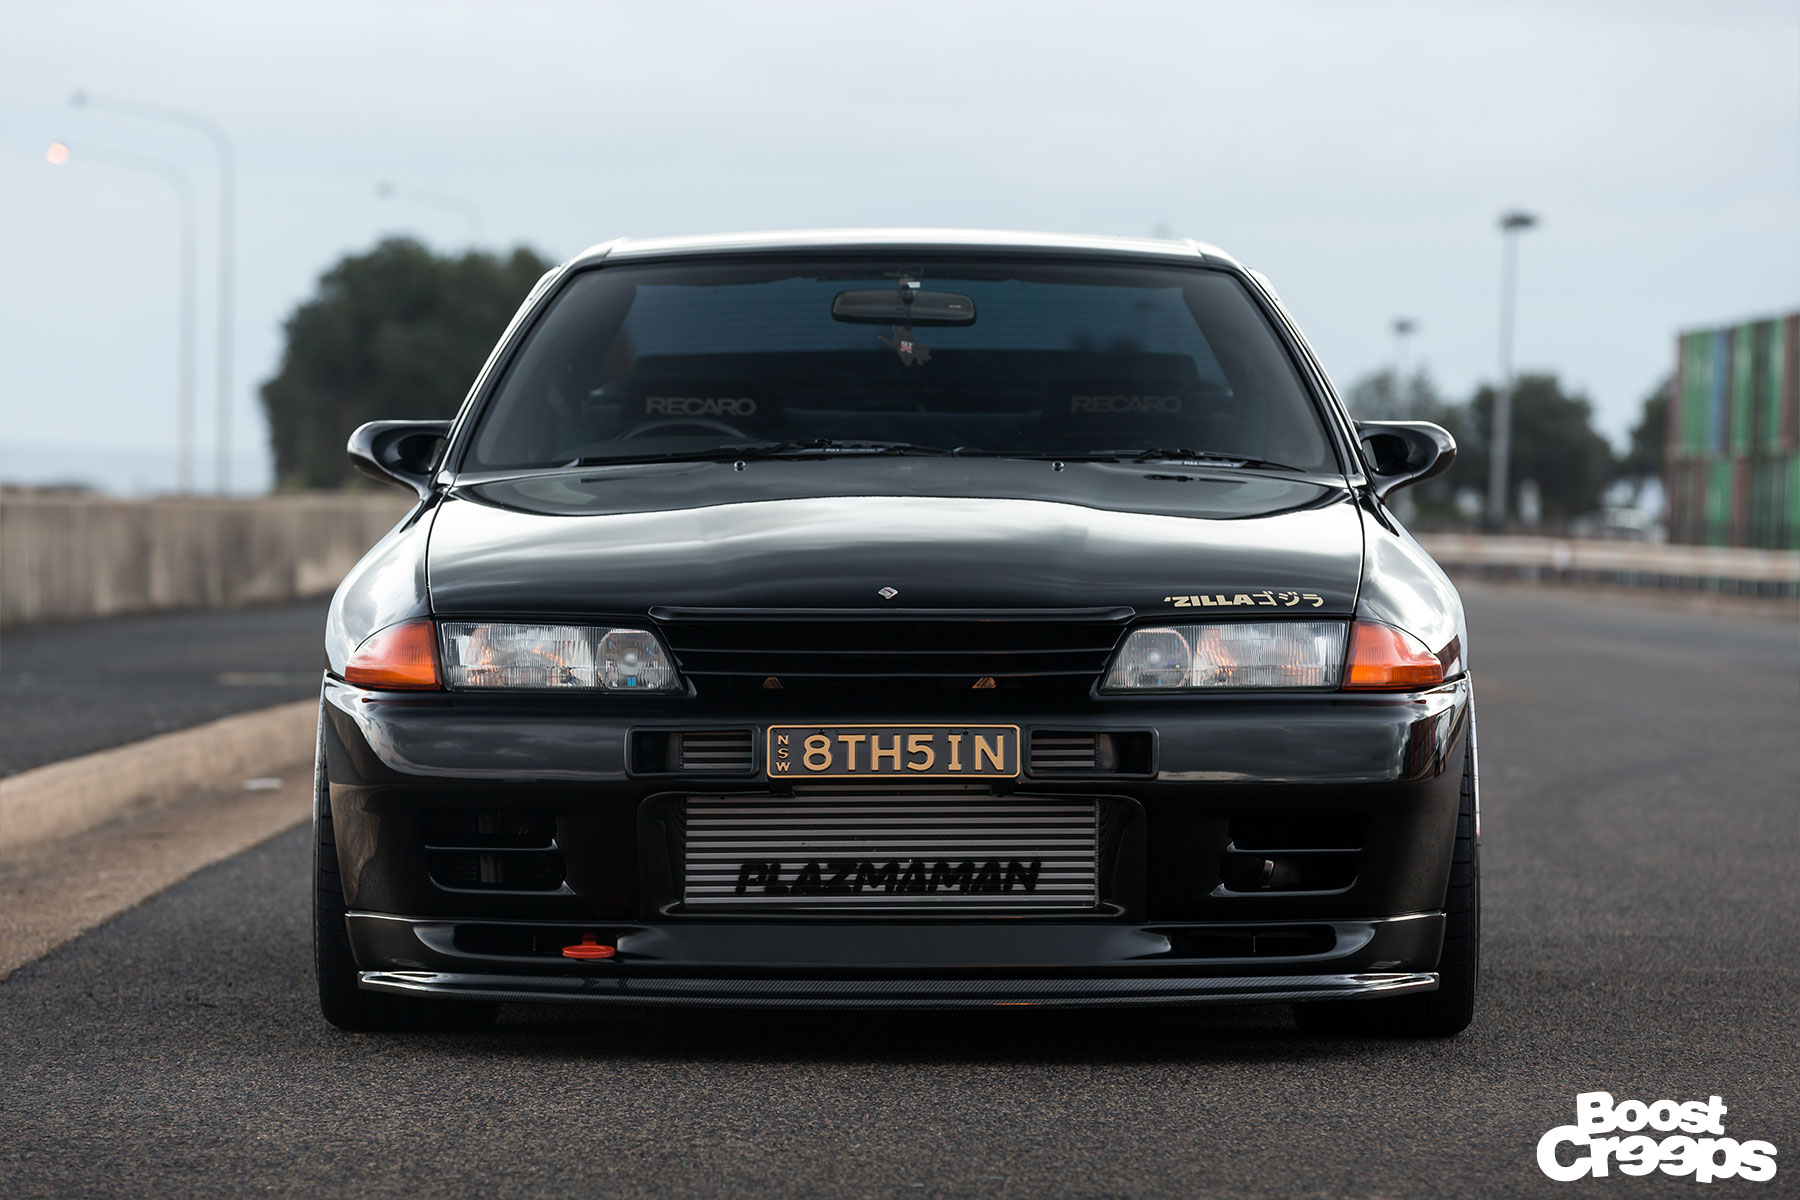 Kase’s LMGT2 Equipped R32 GTR Is Seriously Impressive